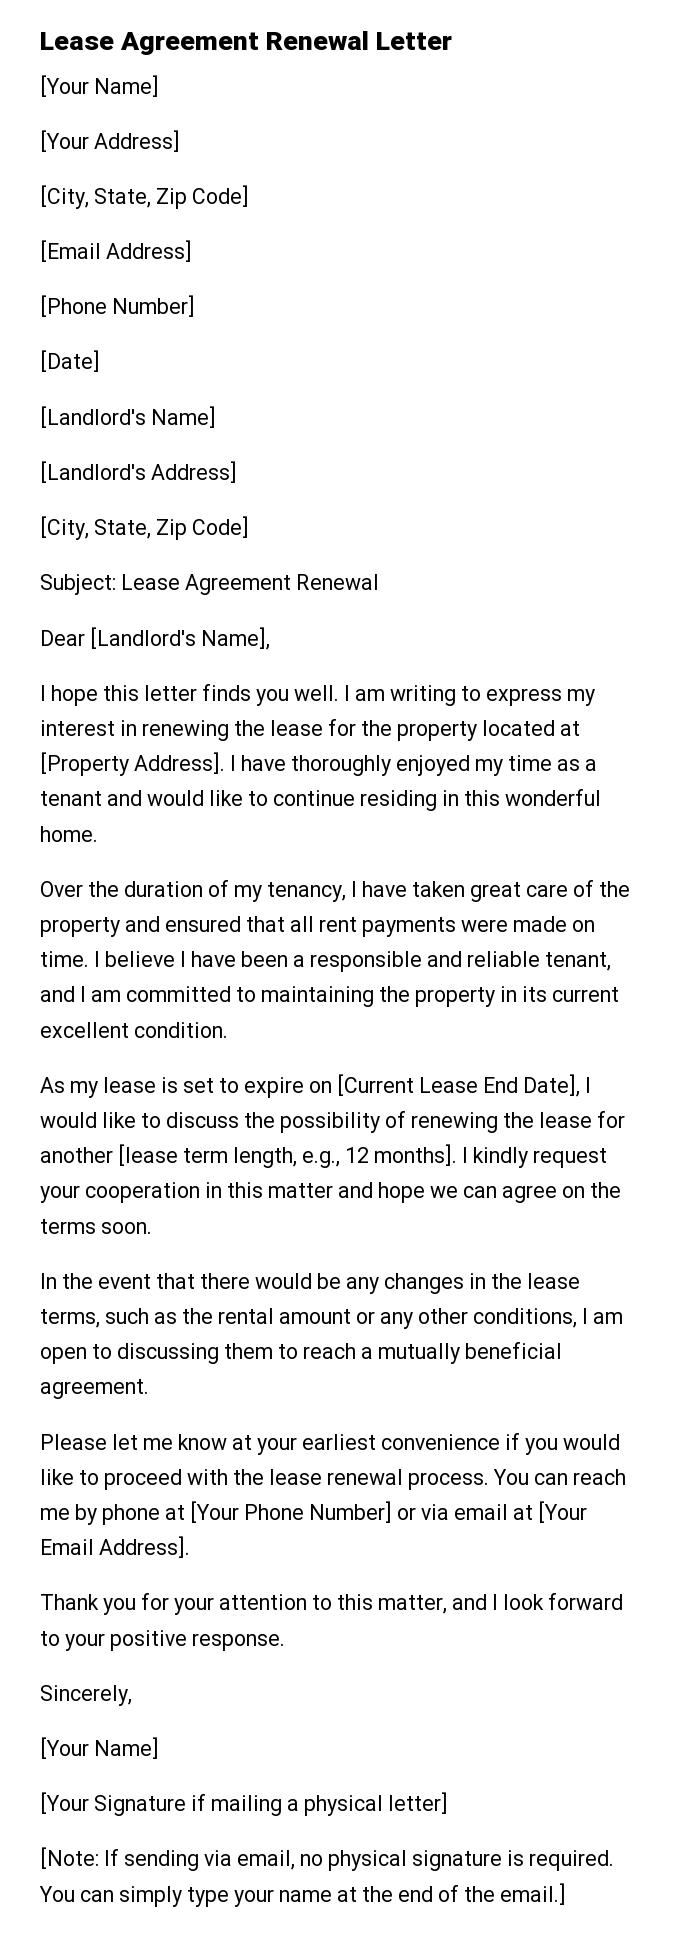 Lease Agreement Renewal Letter